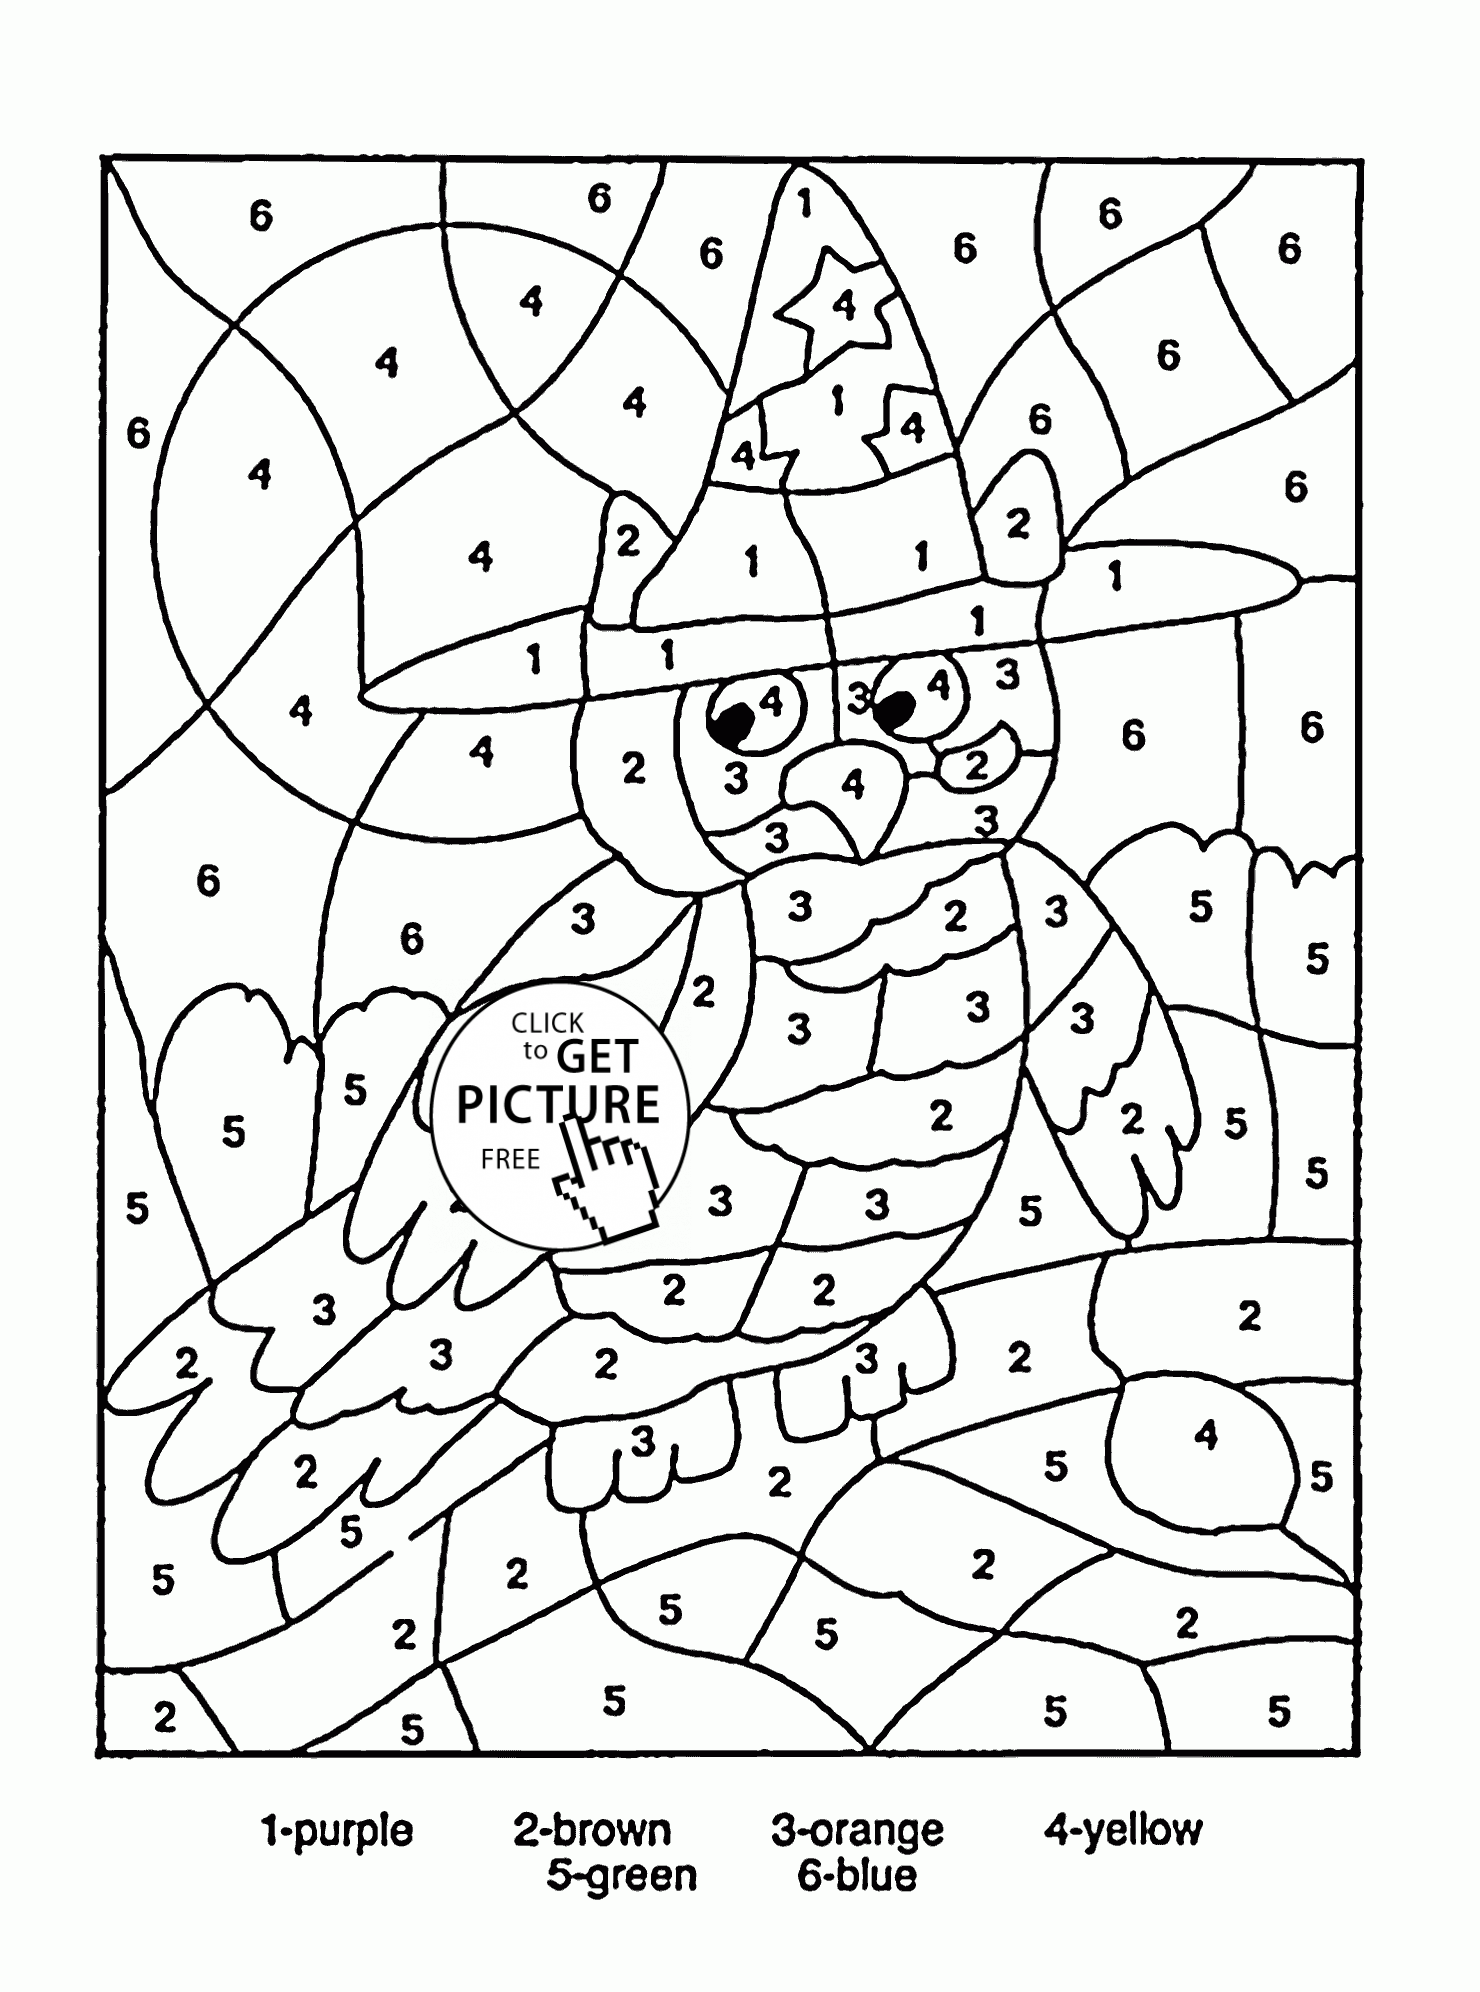 educational coloring sheets color by number owl coloring page for kids education educational coloring sheets 